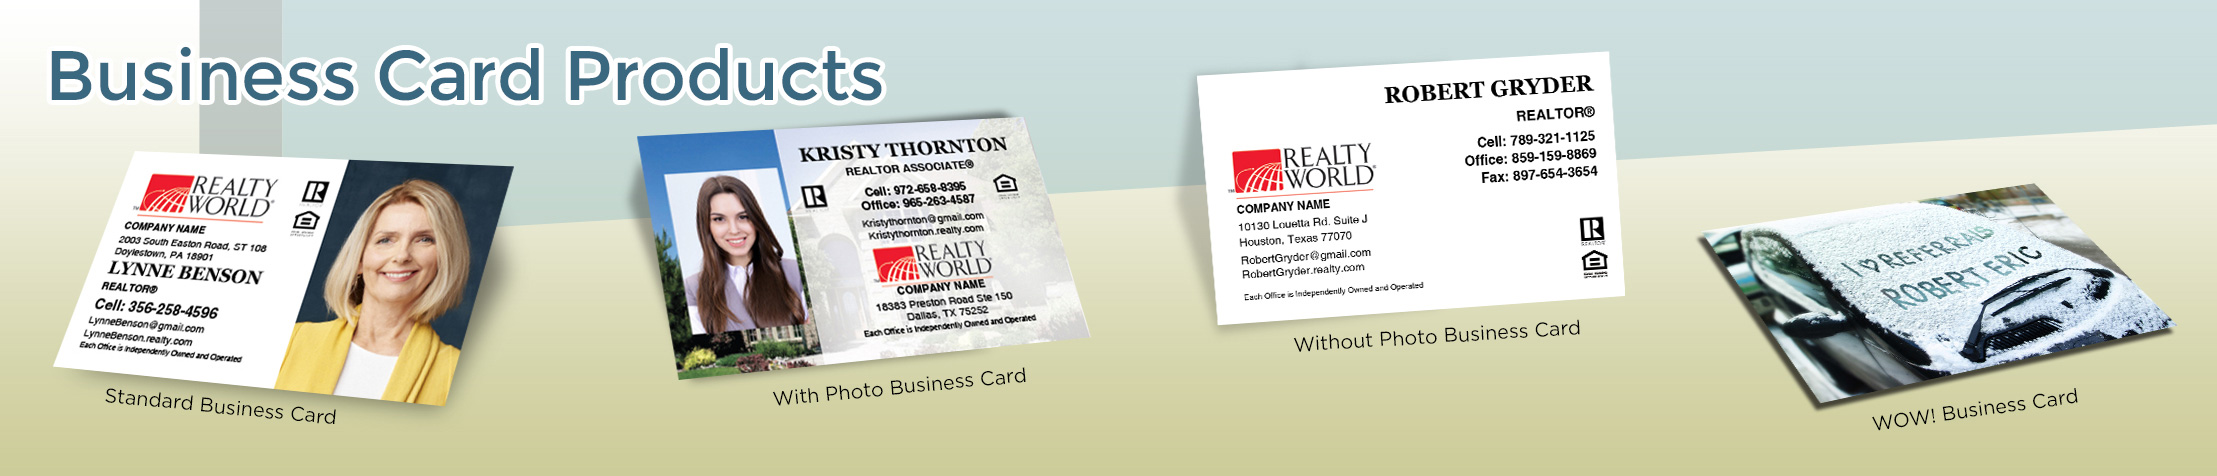 Realty World Real Estate Business Card Products - Realty World  - Unique, Custom Business Cards Printed on Quality Stock with Creative Designs for Realtors | BestPrintBuy.com